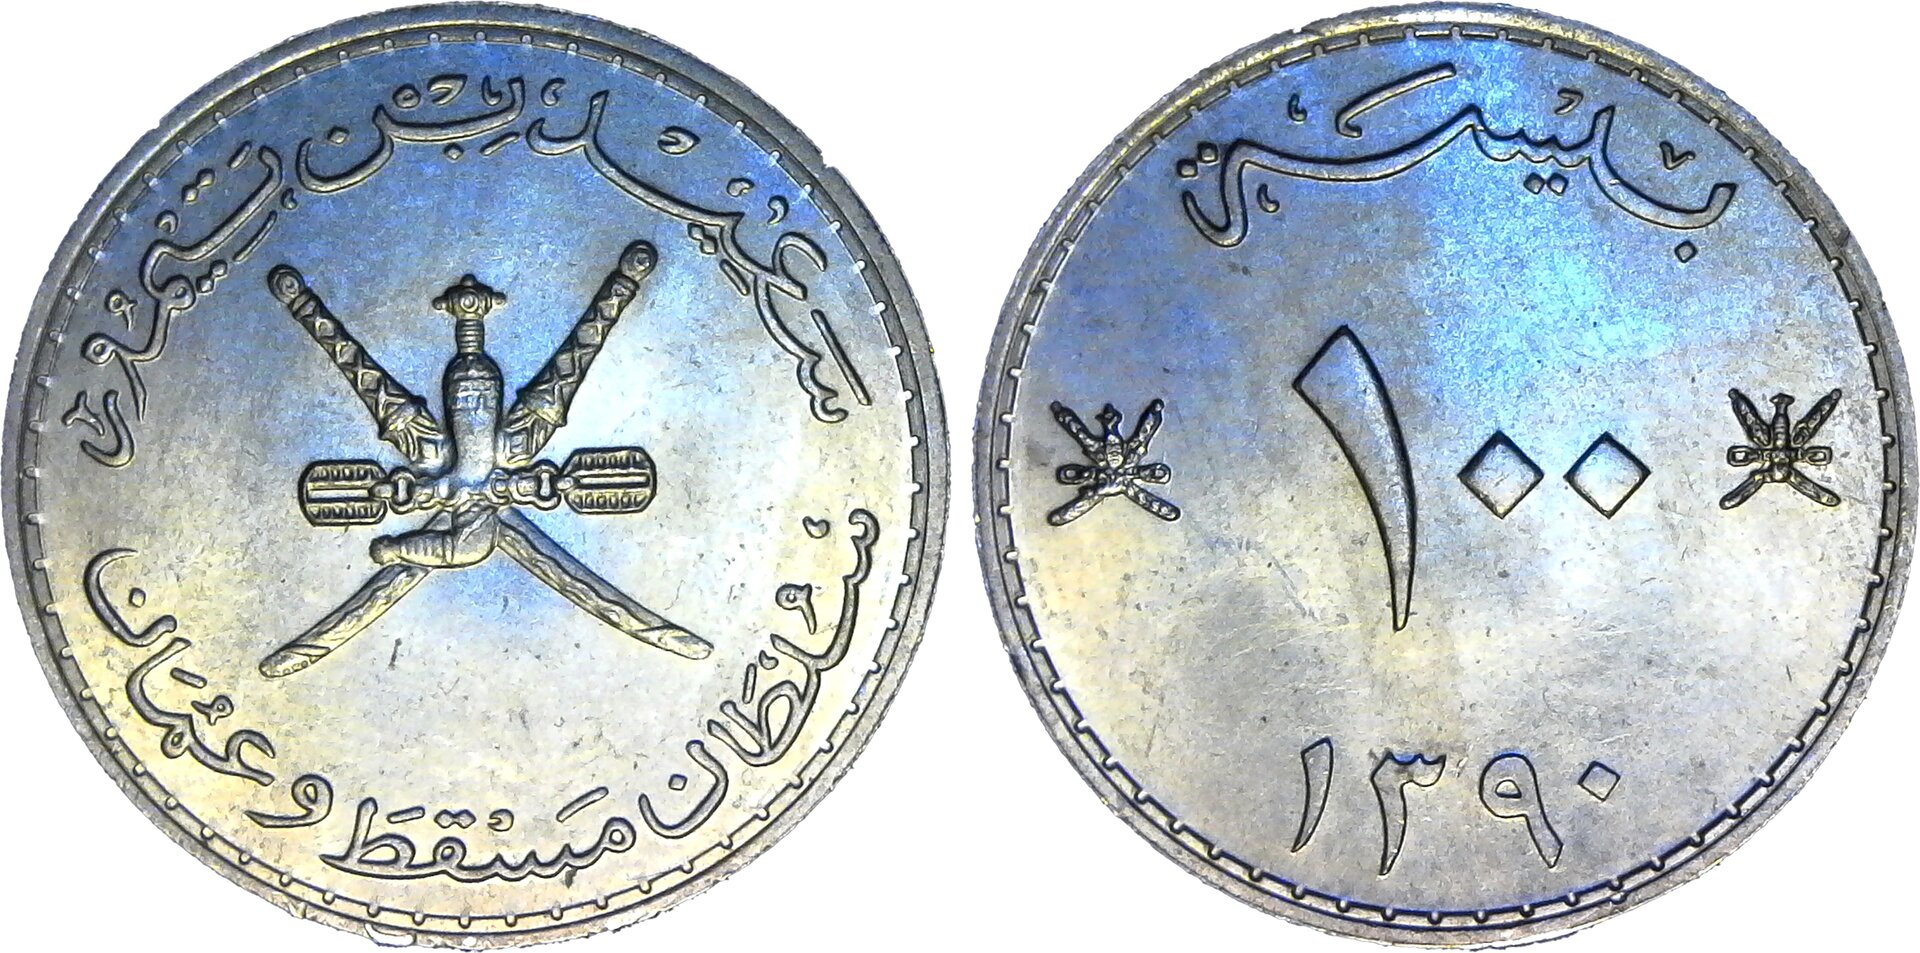 Muscat and Oman 100 Baisa 1970 obv-side-cutout.jpg